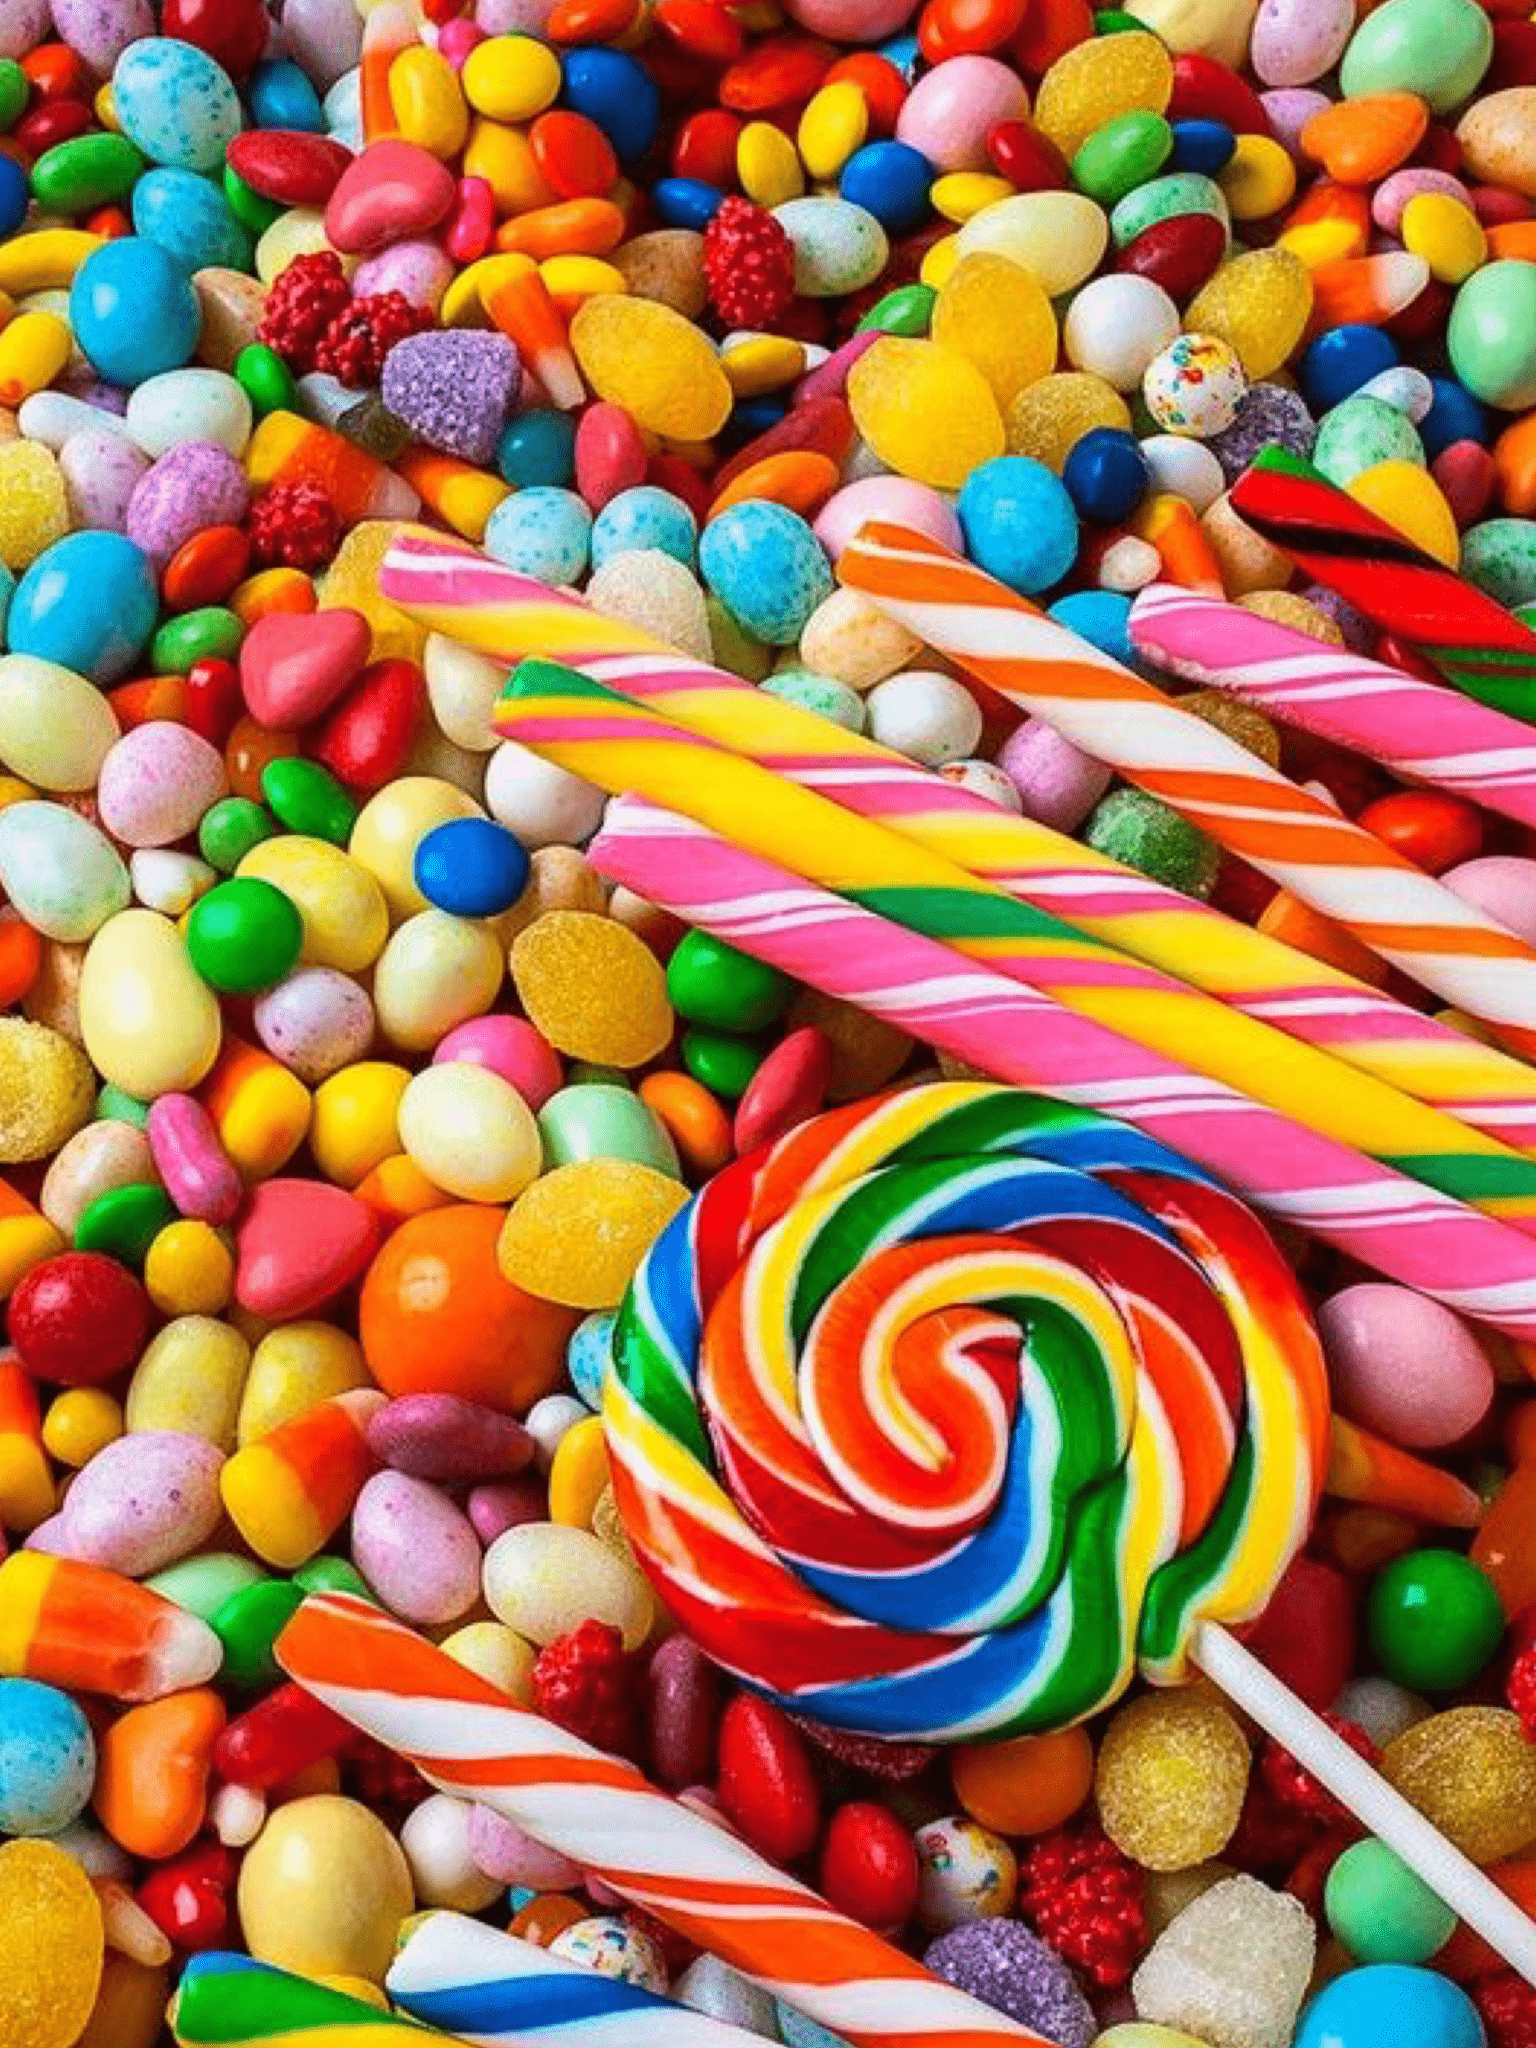 HD wallpaper: Colored Candies, candy, sweet | Wallpaper Flare